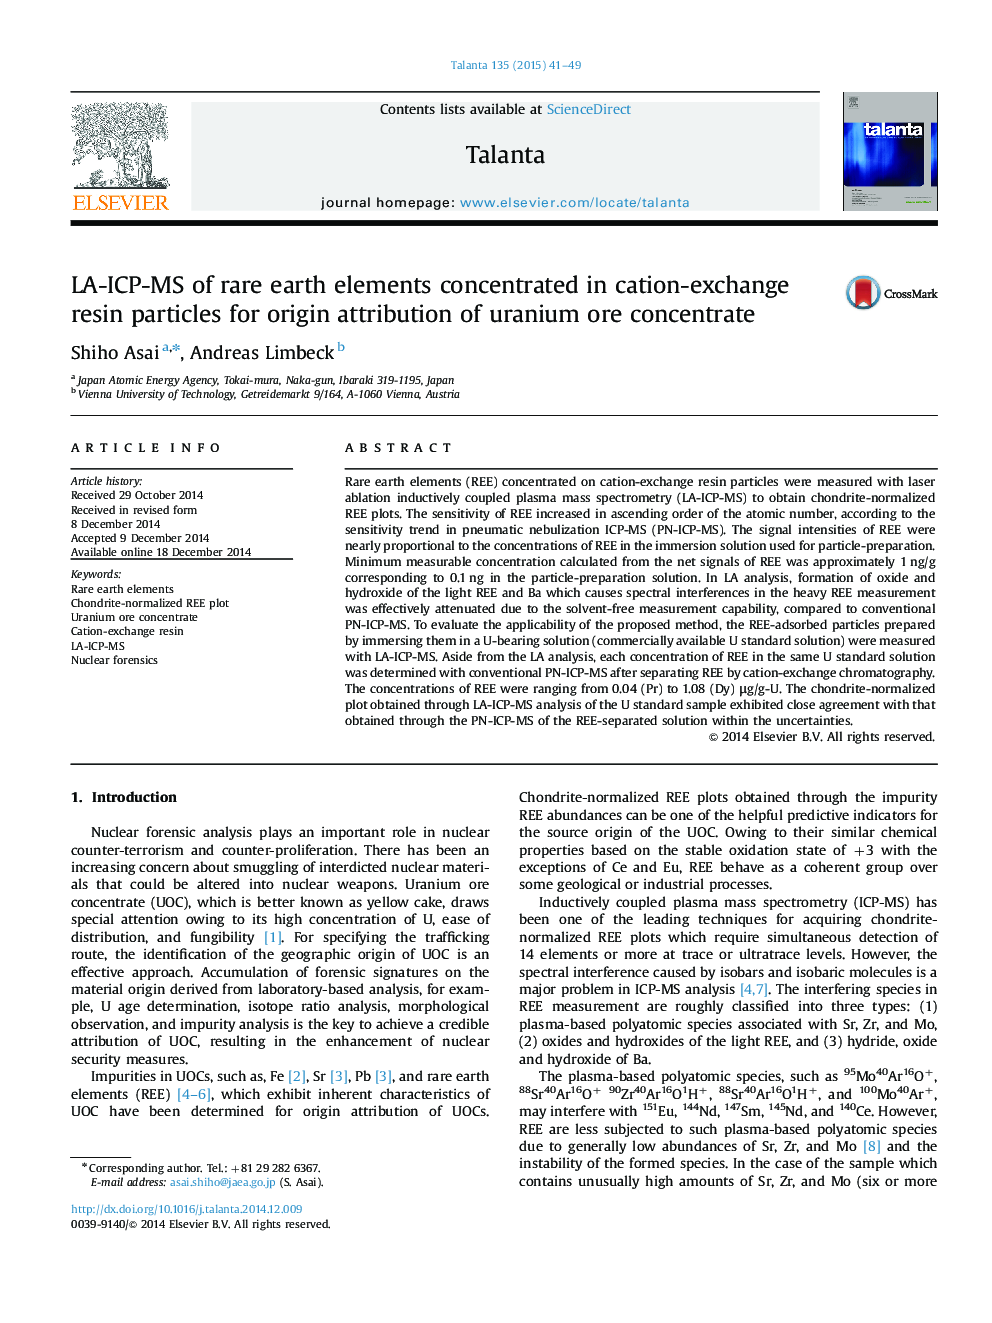 LA-ICP-MS of rare earth elements concentrated in cation-exchange resin particles for origin attribution of uranium ore concentrate